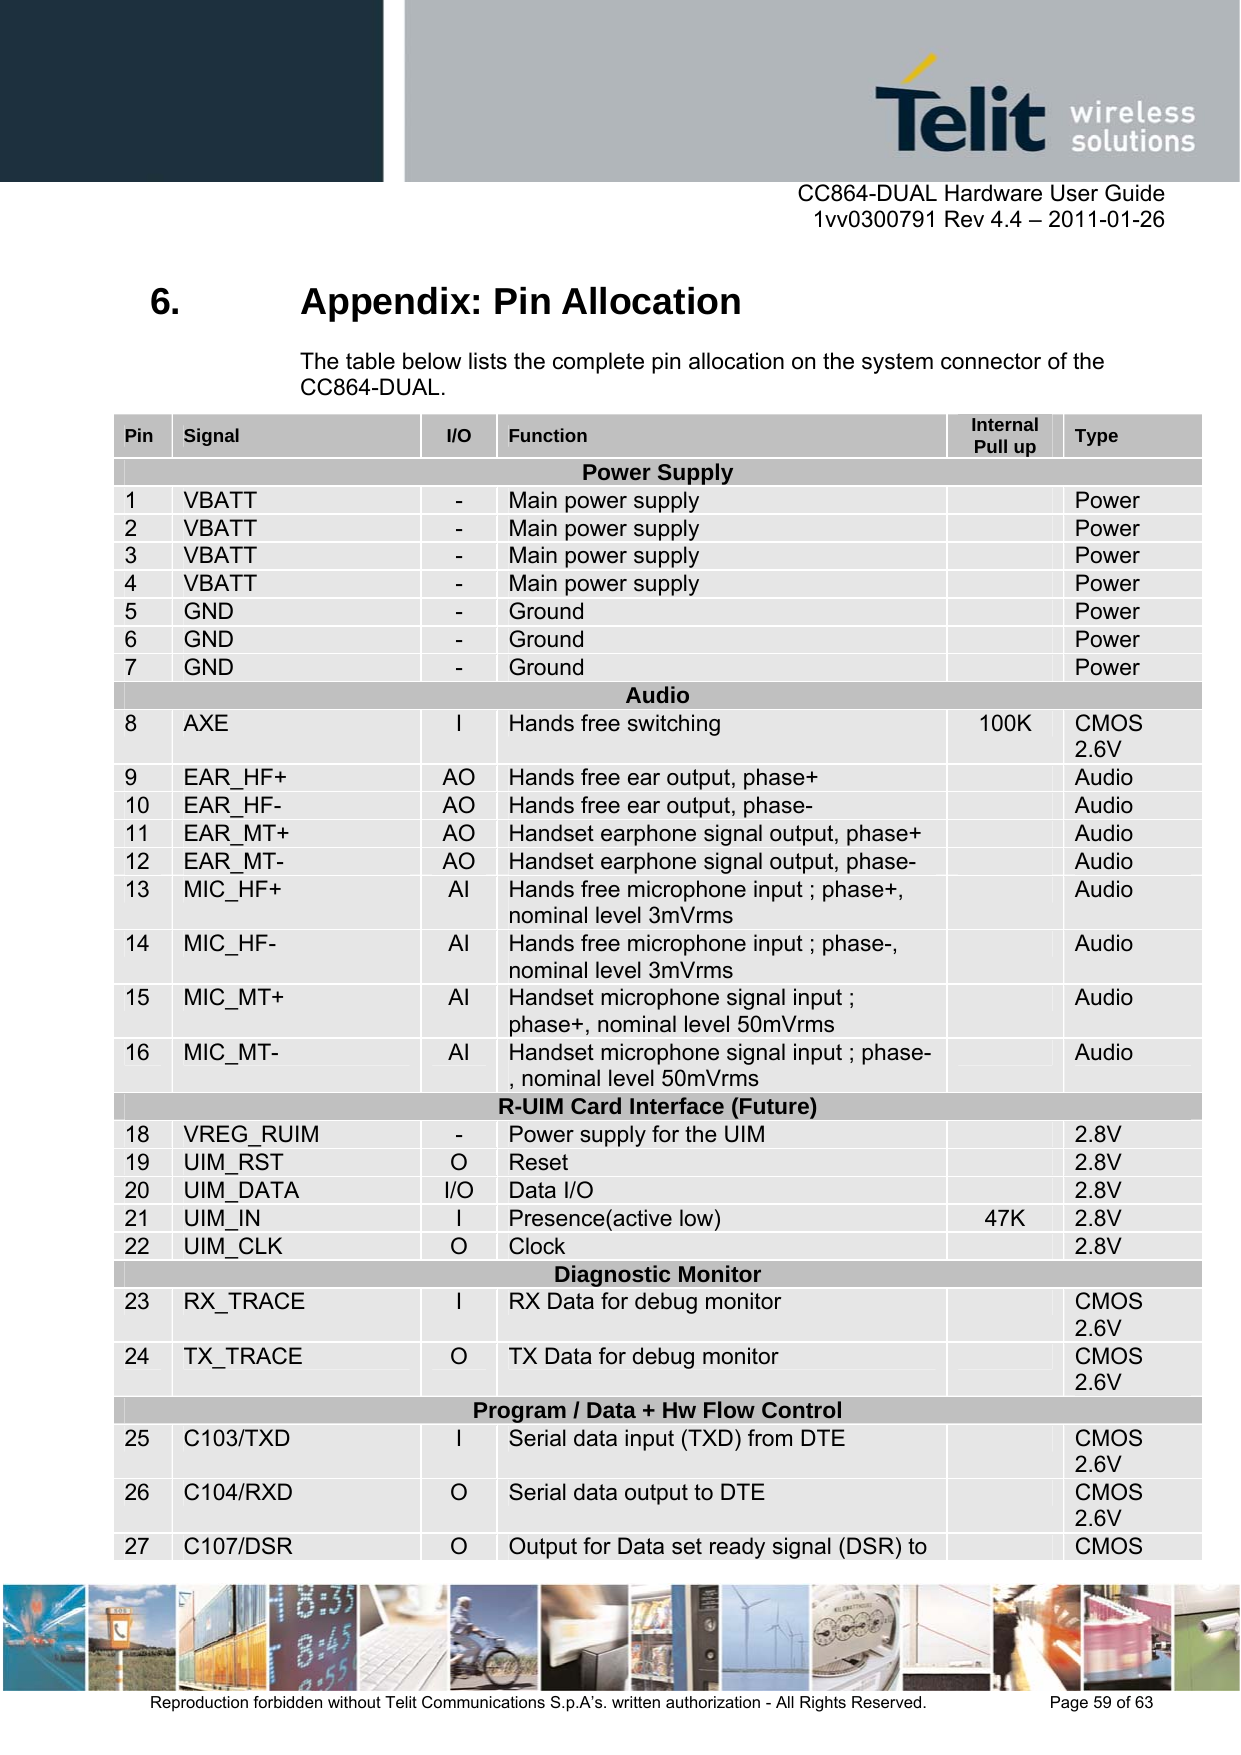      CC864-DUAL Hardware User Guide    1vv0300791 Rev 4.4 – 2011-01-26  Reproduction forbidden without Telit Communications S.p.A’s. written authorization - All Rights Reserved.    Page 59 of 63  6. Appendix: Pin Allocation The table below lists the complete pin allocation on the system connector of the CC864-DUAL. Pin  Signal  I/O  Function  Internal Pull up  Type Power Supply 1  VBATT  -  Main power supply   Power 2  VBATT  -  Main power supply   Power 3  VBATT  -  Main power supply   Power 4  VBATT  -  Main power supply   Power 5  GND  -  Ground   Power 6  GND  -  Ground   Power 7  GND  -  Ground   Power Audio 8  AXE  I  Hands free switching  100K  CMOS 2.6V 9  EAR_HF+  AO  Hands free ear output, phase+   Audio 10  EAR_HF-  AO  Hands free ear output, phase-   Audio 11  EAR_MT+  AO  Handset earphone signal output, phase+   Audio 12  EAR_MT-  AO  Handset earphone signal output, phase-   Audio 13  MIC_HF+  AI  Hands free microphone input ; phase+, nominal level 3mVrms  Audio 14  MIC_HF-  AI  Hands free microphone input ; phase-, nominal level 3mVrms  Audio 15  MIC_MT+  AI  Handset microphone signal input ; phase+, nominal level 50mVrms  Audio 16  MIC_MT-  AI  Handset microphone signal input ; phase-, nominal level 50mVrms  Audio R-UIM Card Interface (Future) 18  VREG_RUIM  -  Power supply for the UIM   2.8V 19  UIM_RST  O  Reset   2.8V 20  UIM_DATA  I/O  Data I/O   2.8V 21  UIM_IN  I  Presence(active low)  47K  2.8V 22  UIM_CLK  O  Clock   2.8V Diagnostic Monitor 23  RX_TRACE  I  RX Data for debug monitor    CMOS 2.6V 24  TX_TRACE  O  TX Data for debug monitor    CMOS 2.6V Program / Data + Hw Flow Control 25  C103/TXD  I  Serial data input (TXD) from DTE    CMOS 2.6V 26  C104/RXD  O  Serial data output to DTE    CMOS 2.6V 27  C107/DSR  O  Output for Data set ready signal (DSR) to    CMOS 